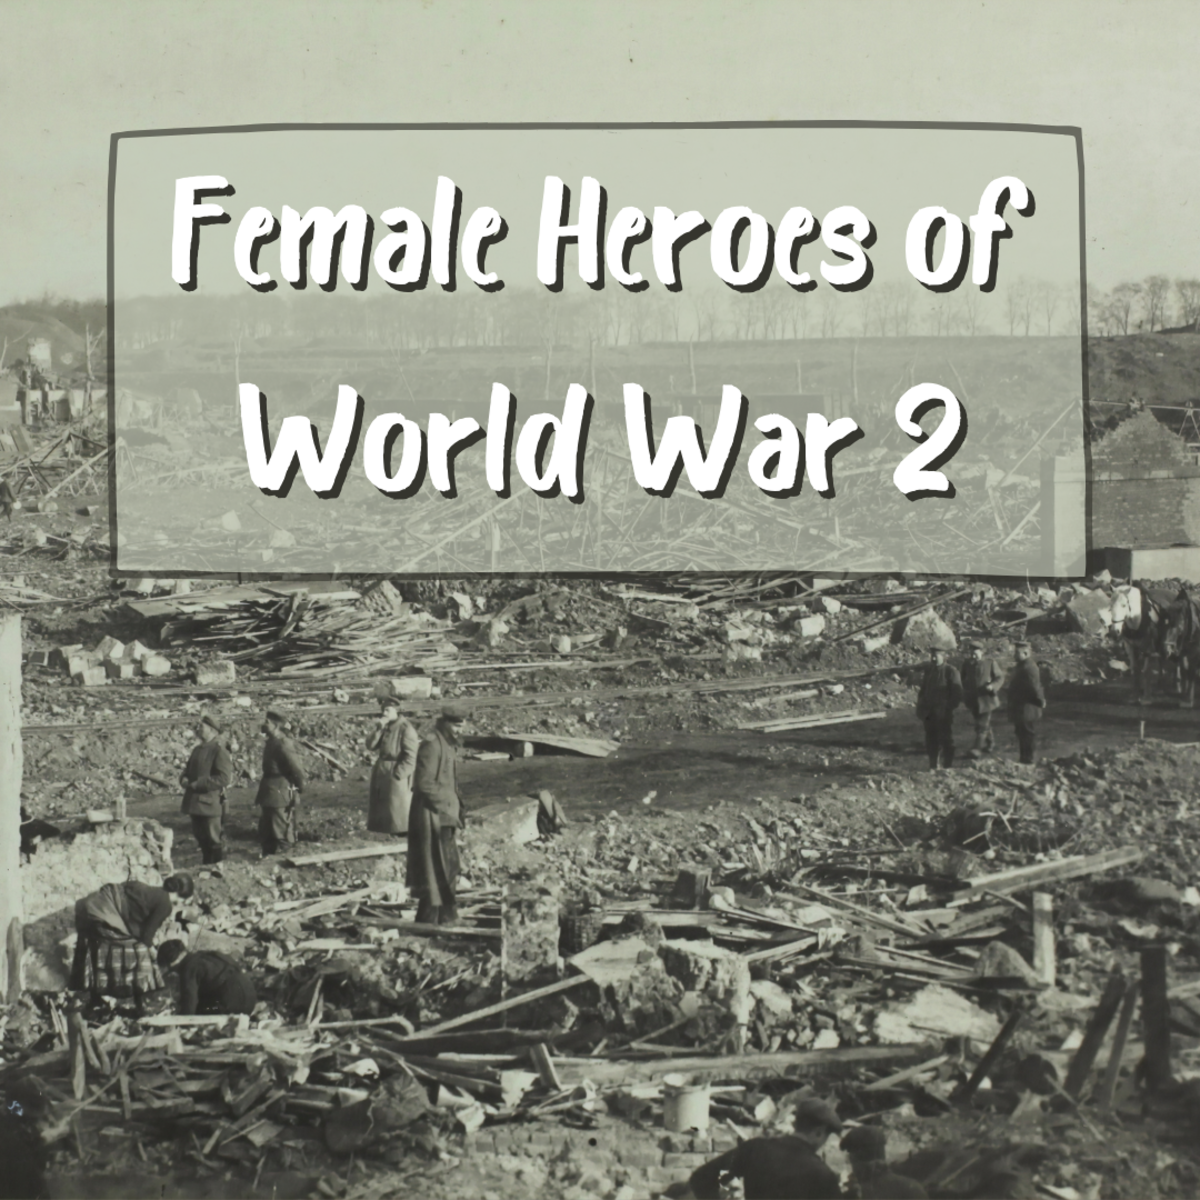 Learn about some of the most heroic women of the Second World War. These female heroes went above and beyond during WWII, risking life and limb to serve their countries and humanity.